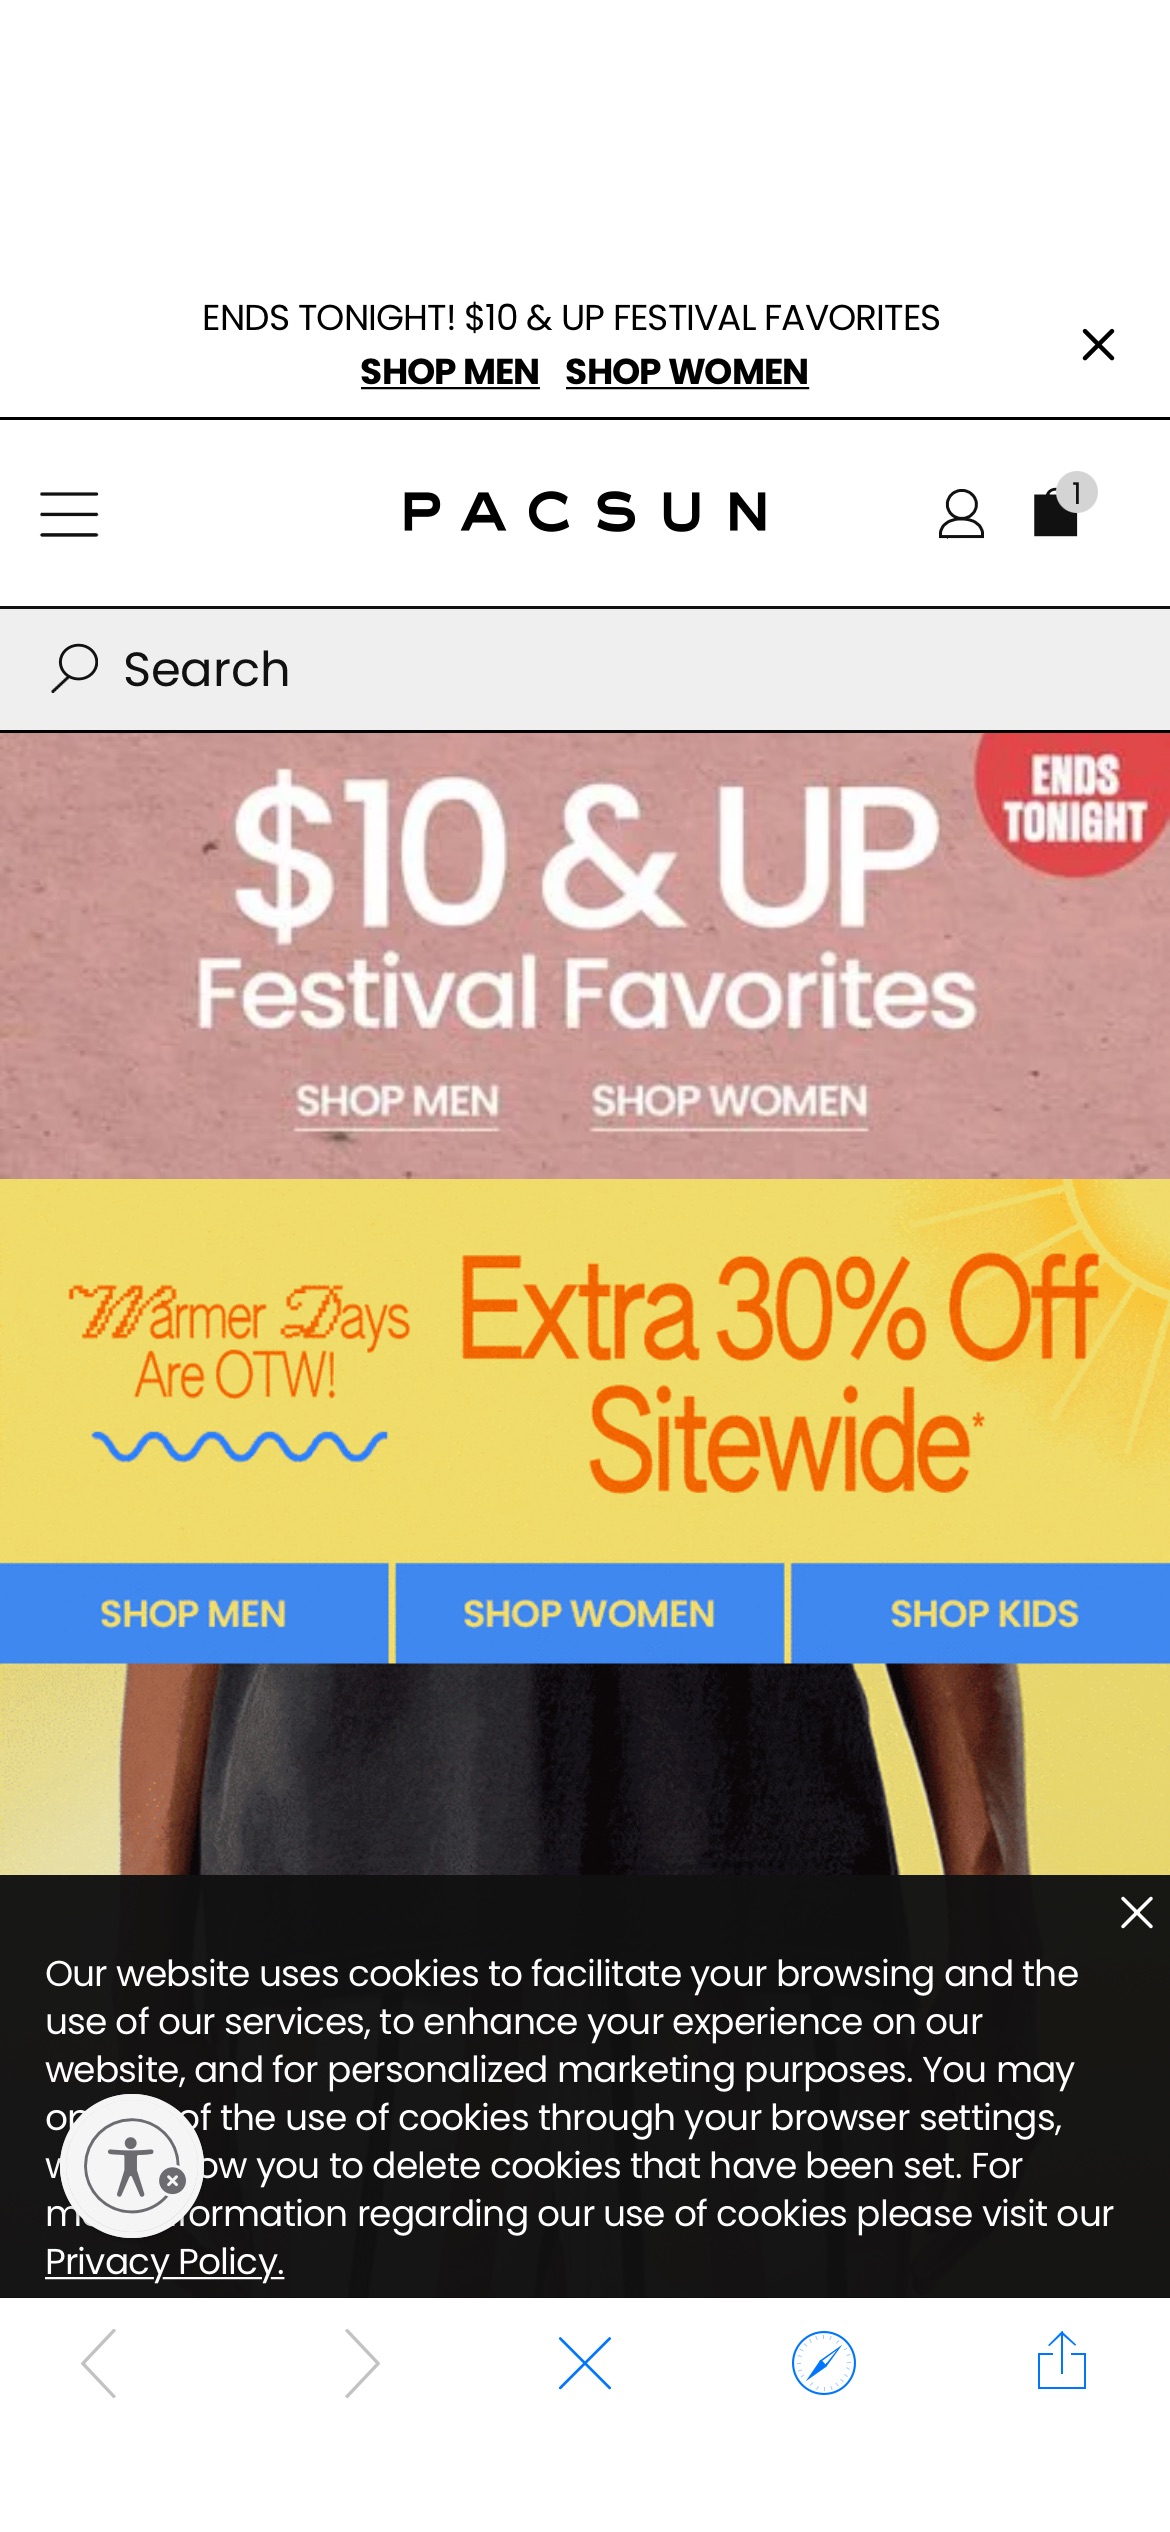 Extra 30% Off Sitewide